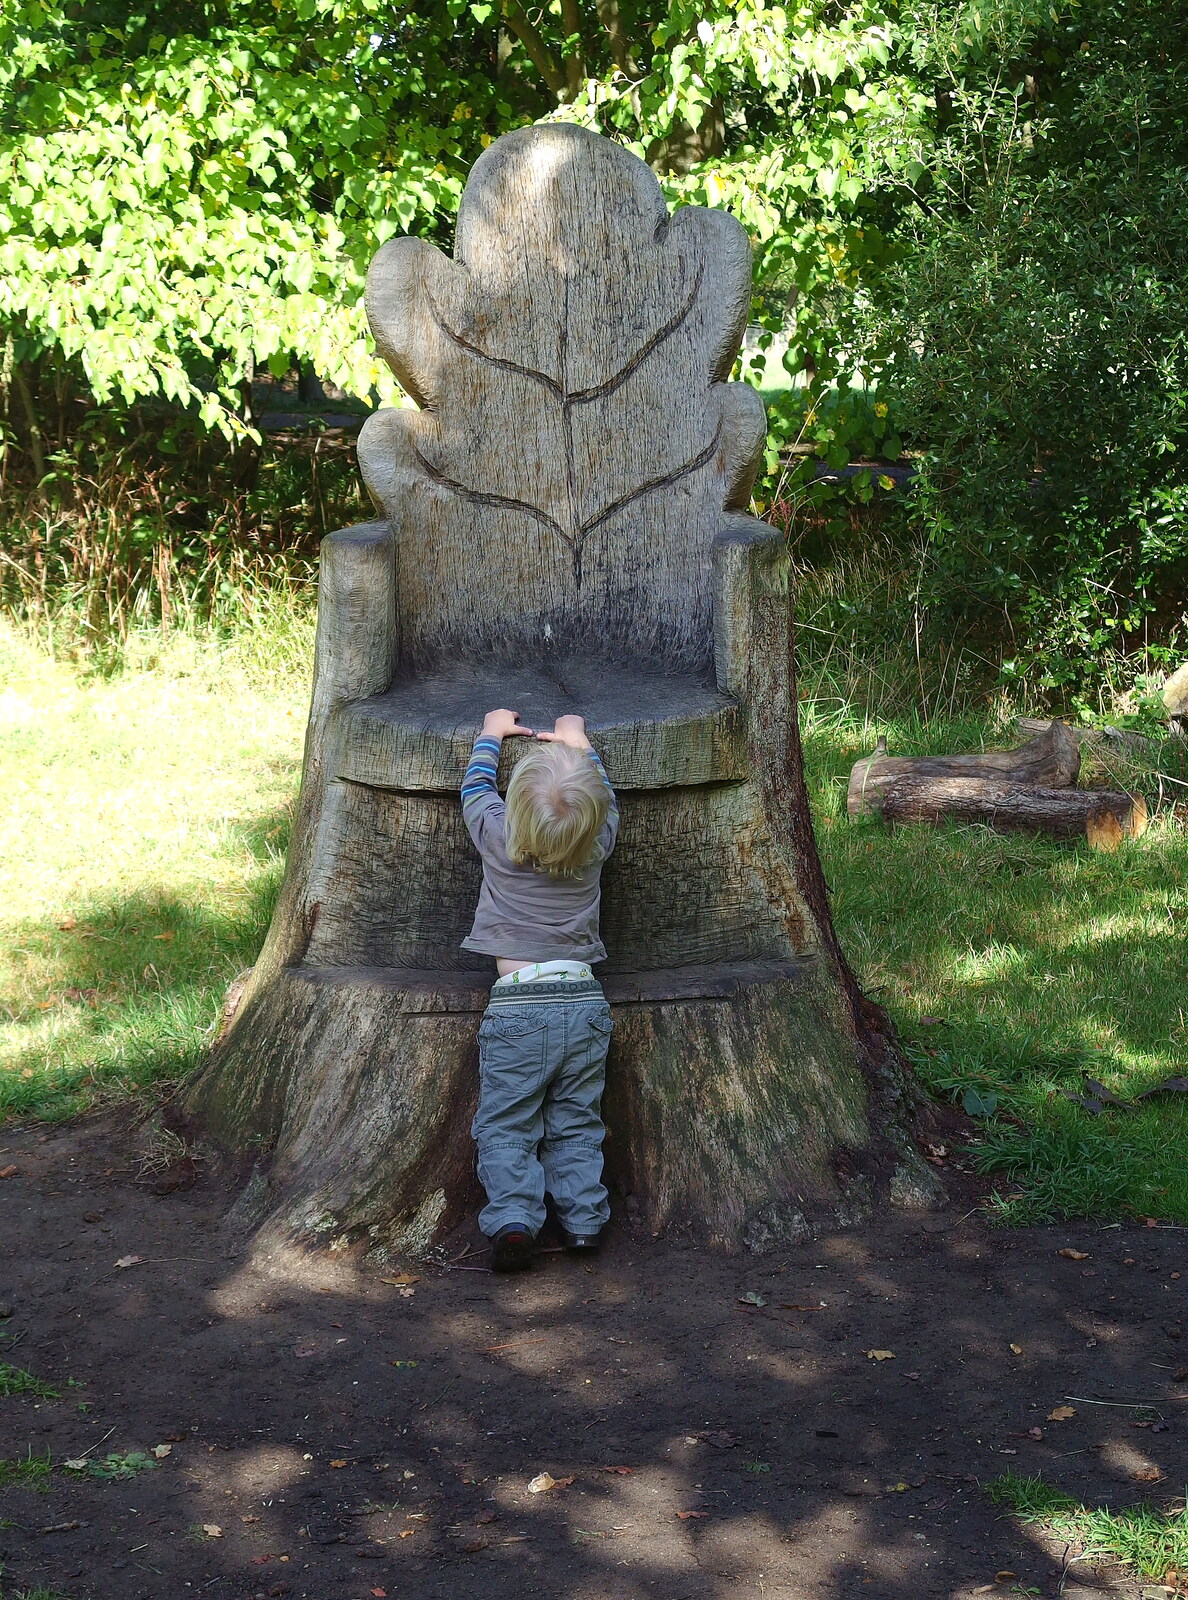 Harry tries to climb the throne from A Walk Around Thornham, and Jacqui Dankworth, Bungay, Suffolk - 6th October 2013